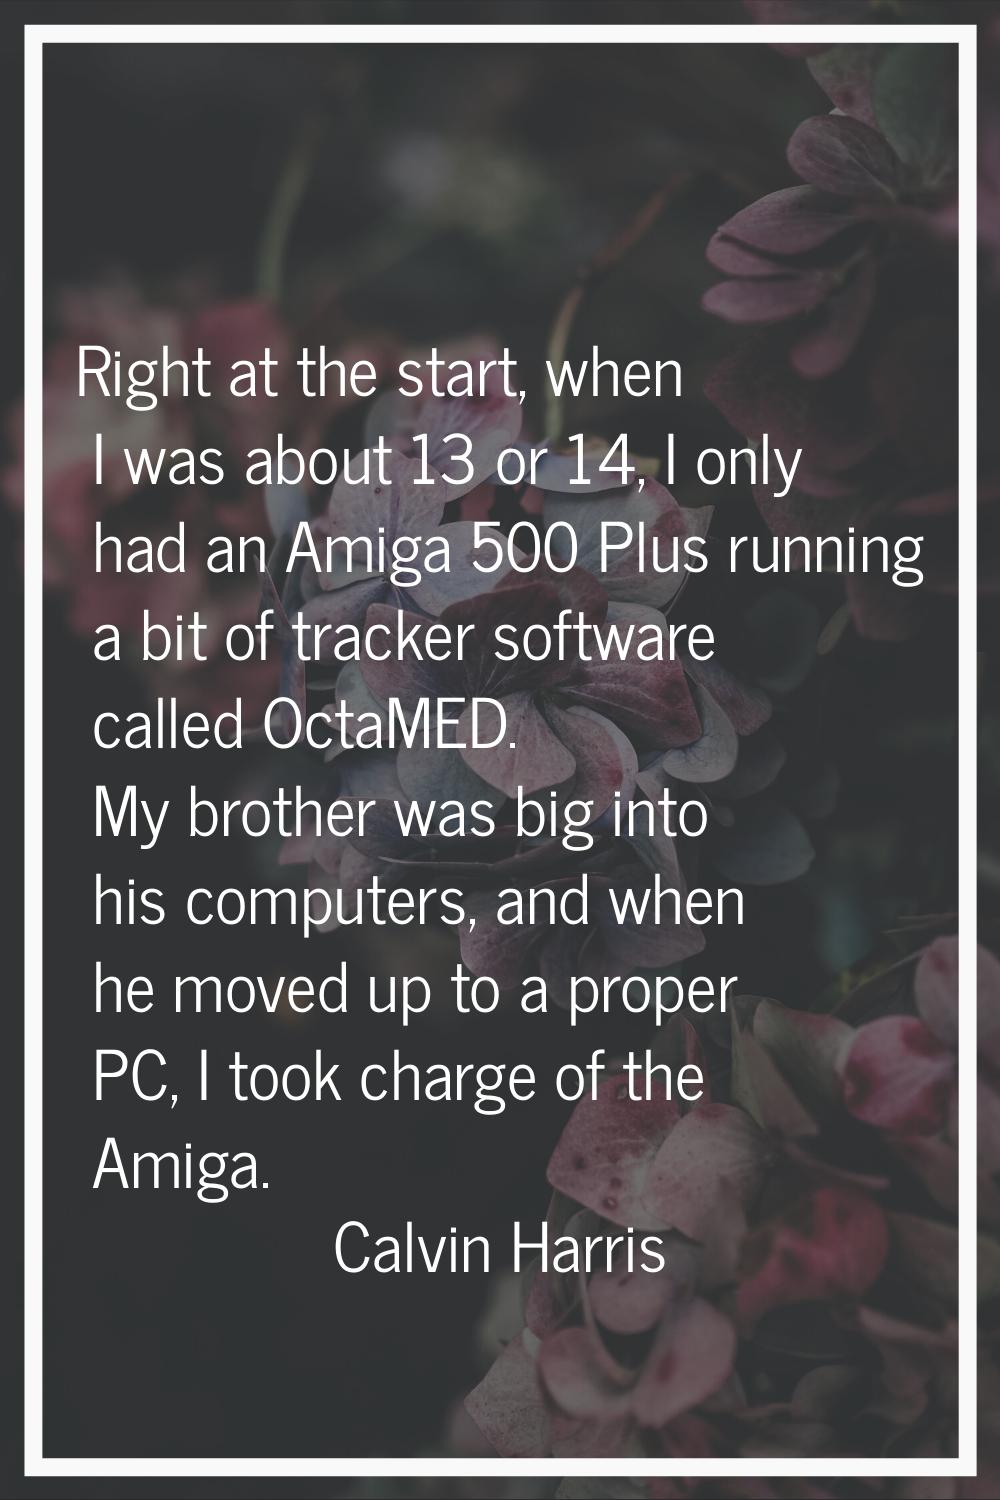 Right at the start, when I was about 13 or 14, I only had an Amiga 500 Plus running a bit of tracke